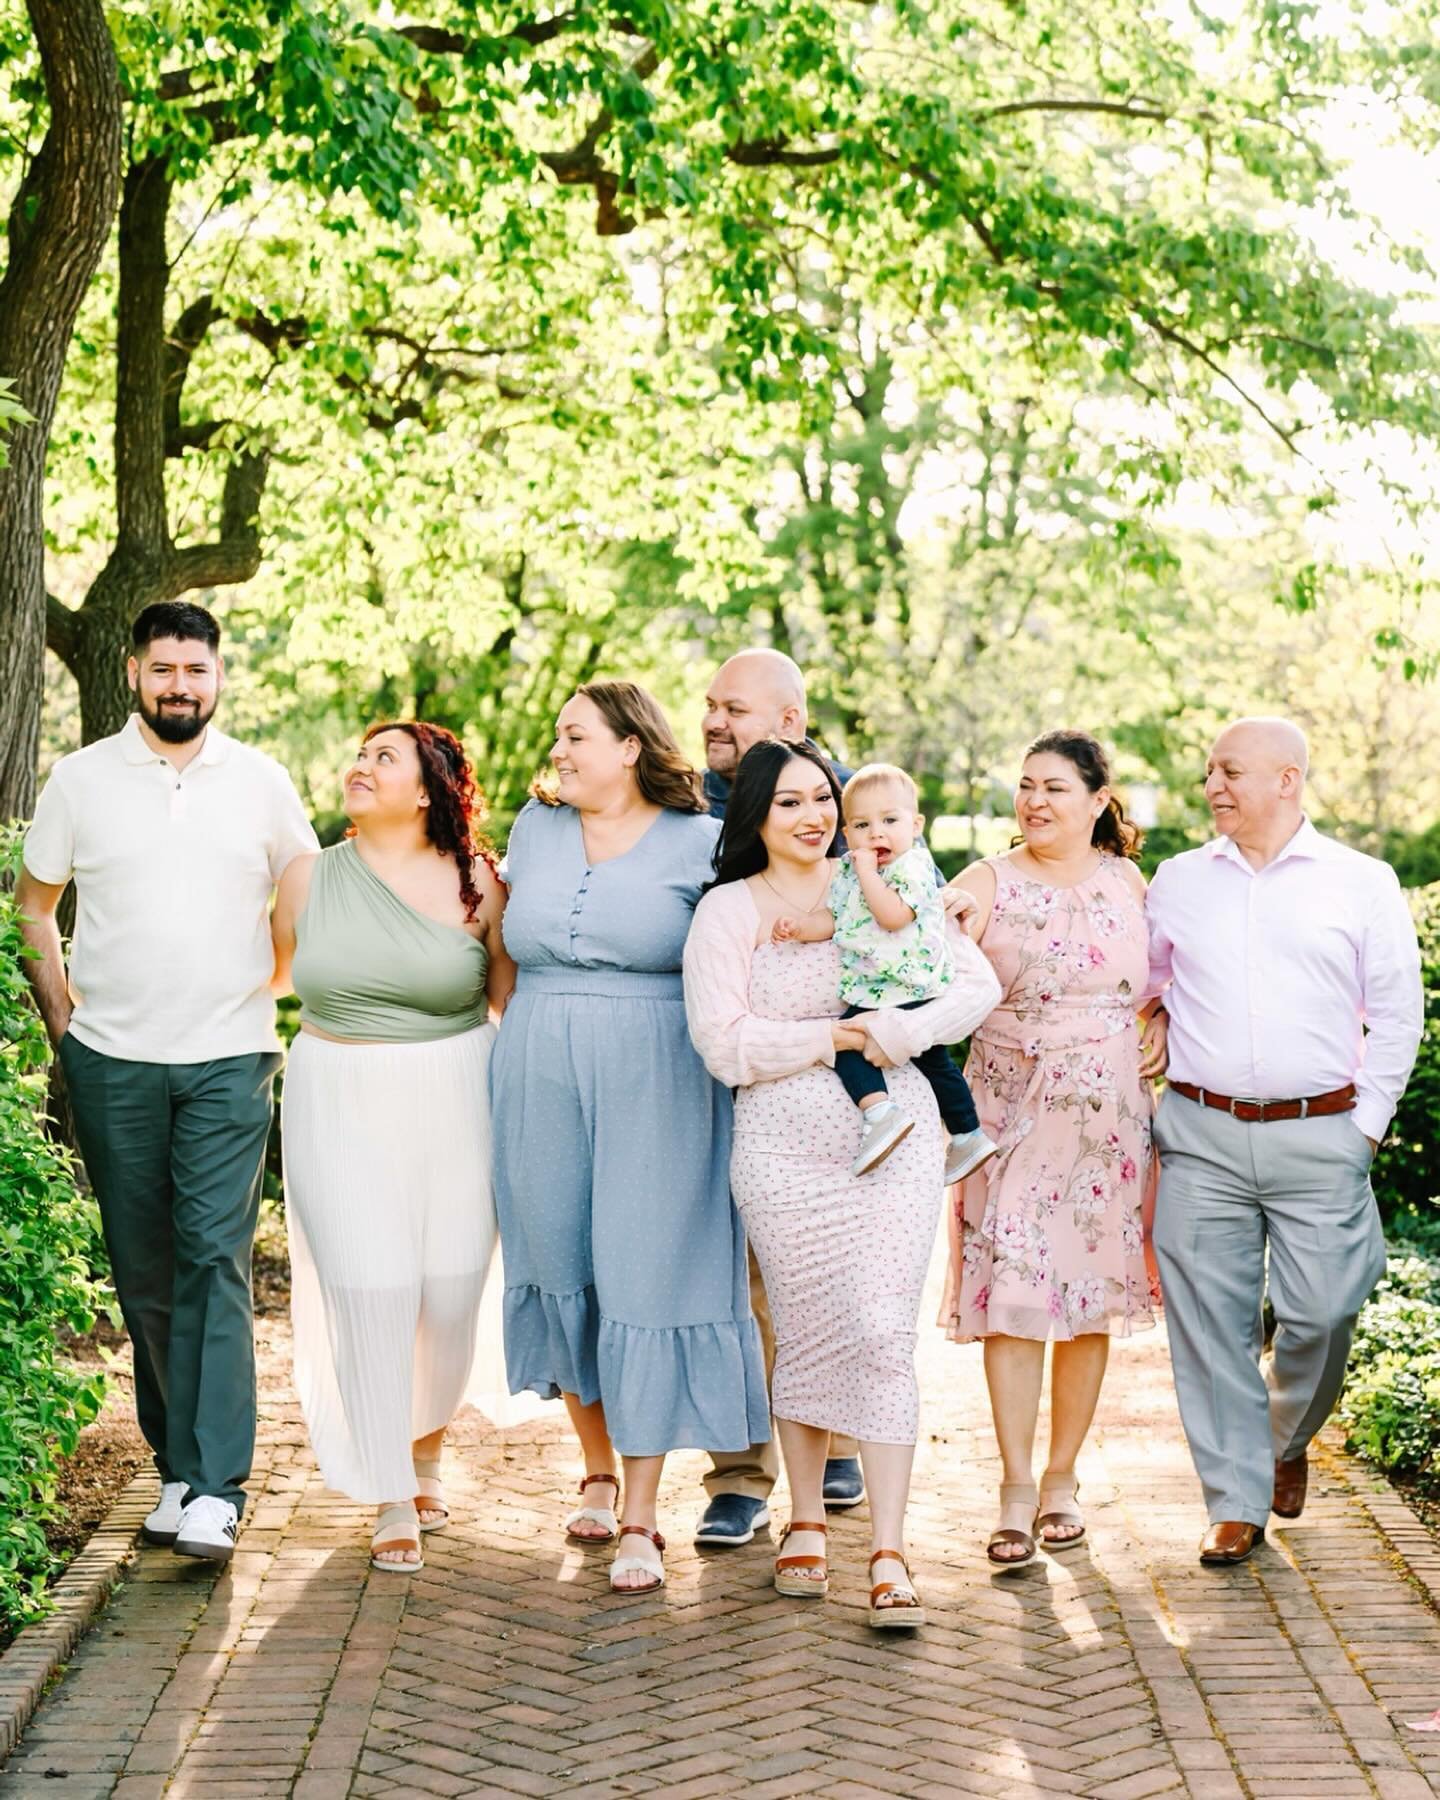 One of the prettiest generational family photo sessions I&rsquo;ve ever gotten to capture 🥰 What a perfect gift for the Mother&rsquo;s Day season. And Chicago in May is my absolute favorite. I cannot get over how beautiful the tulips and blooms were